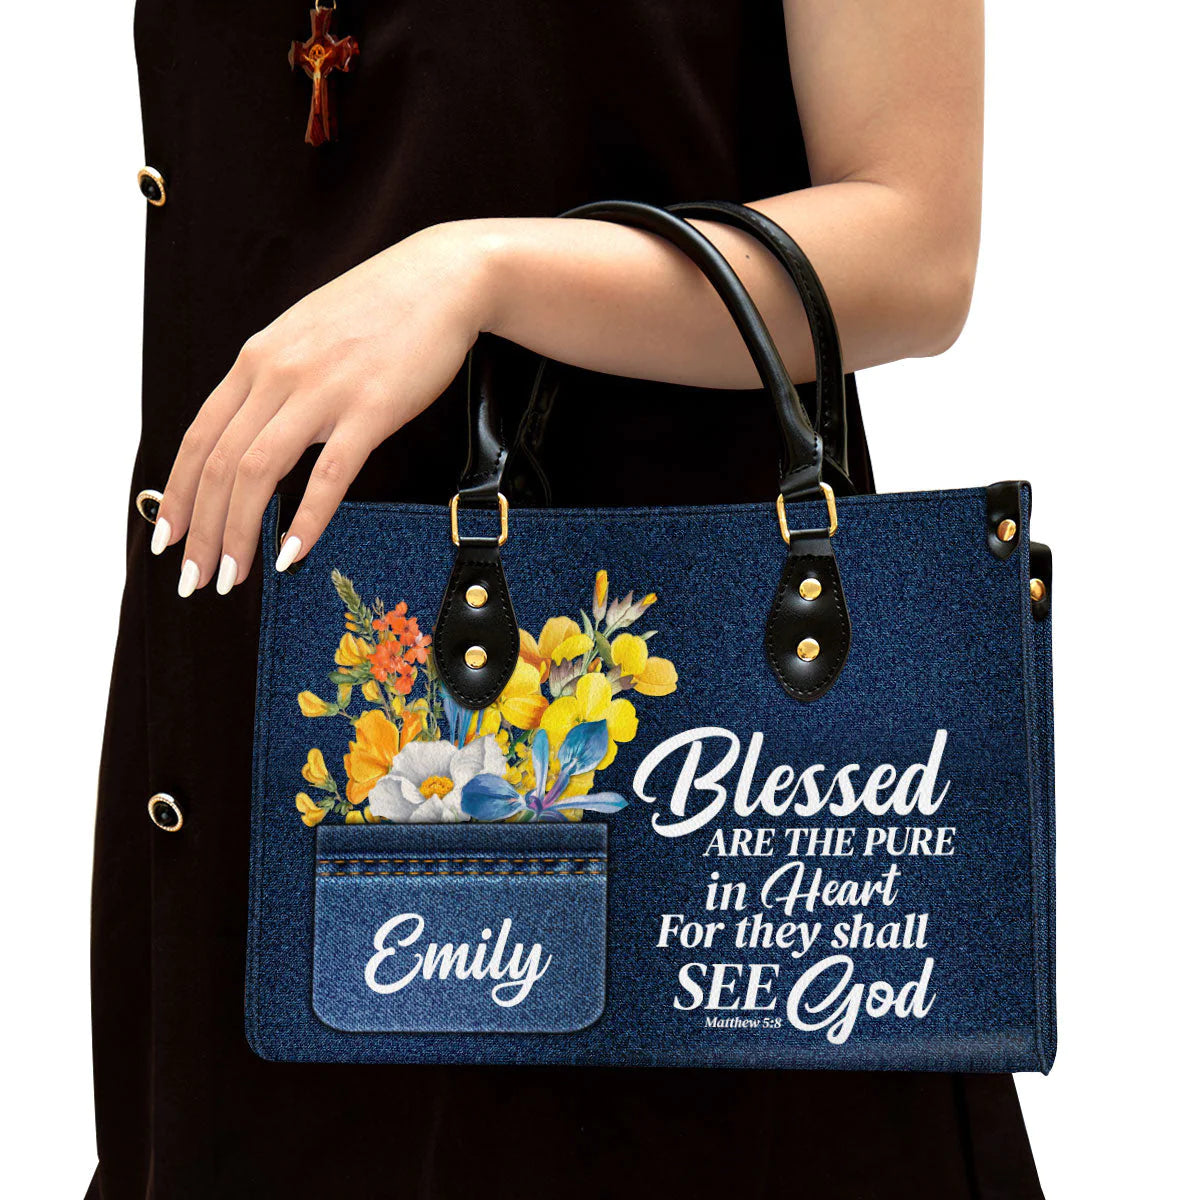 Christianart Handbag, This Is The Day That The Lord Has Made, Personalized Gifts, Gifts for Women, Christmas Gift. - Christian Art Bag